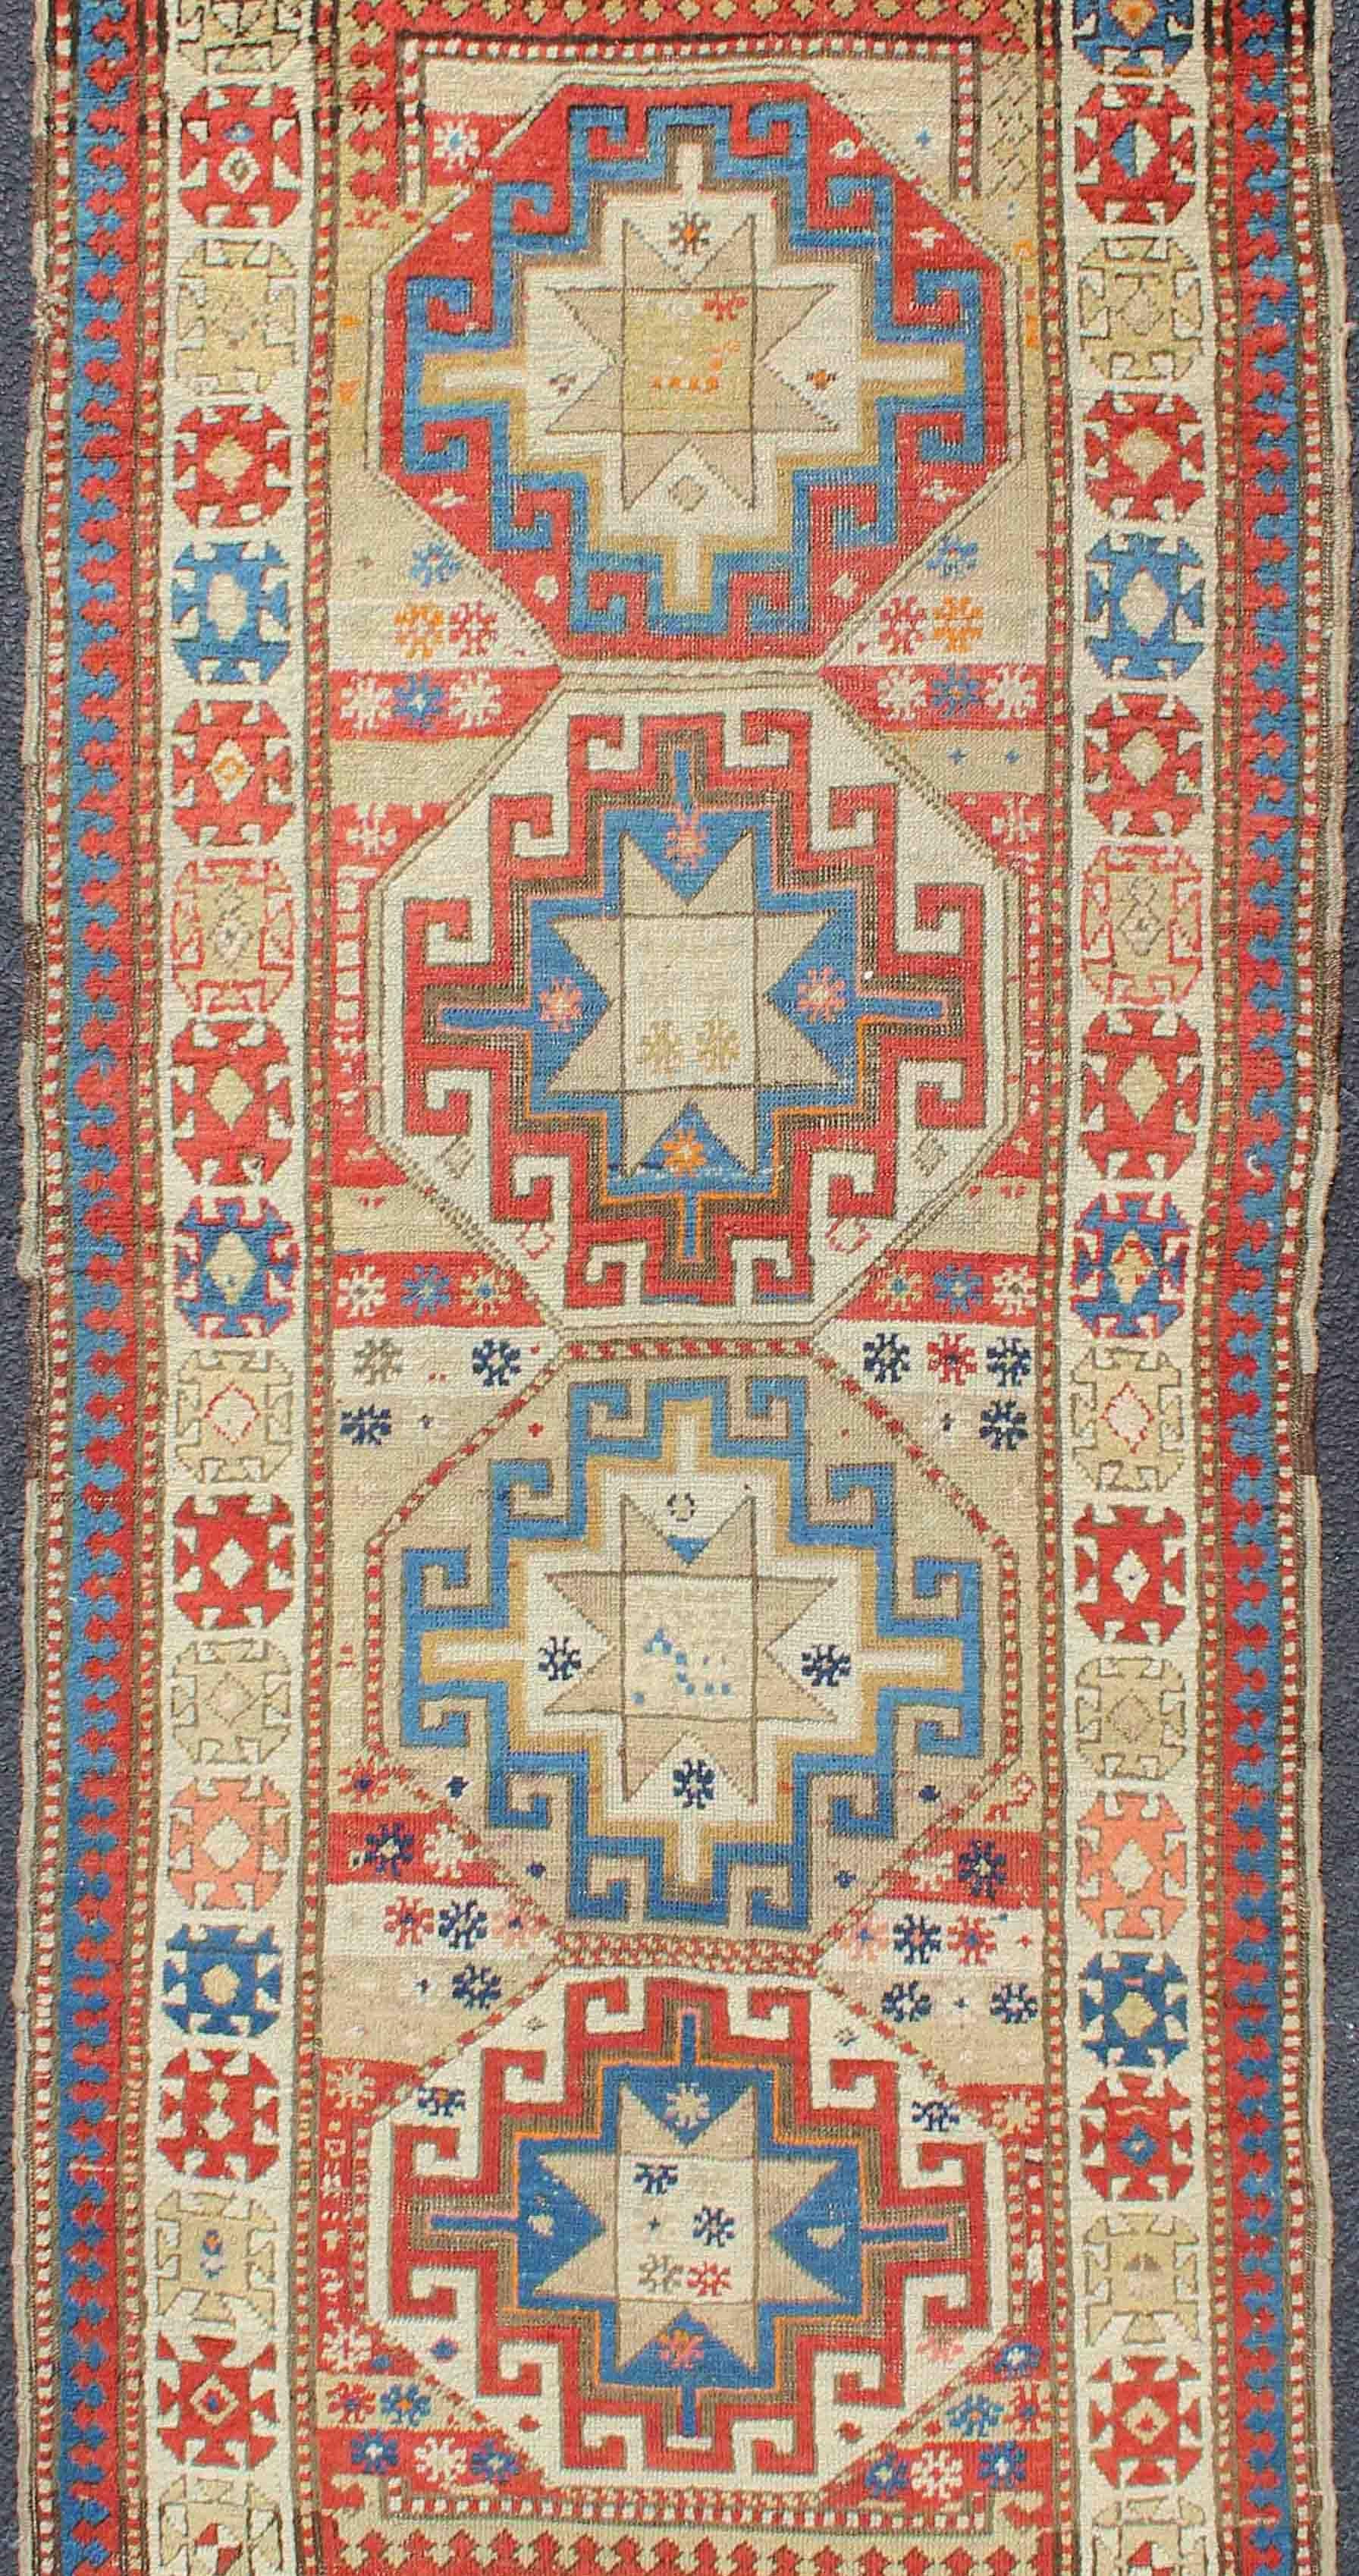 Hand-Knotted Multicolored Medallion Antique Caucasian Kazak Rug with Geometric Medallions For Sale